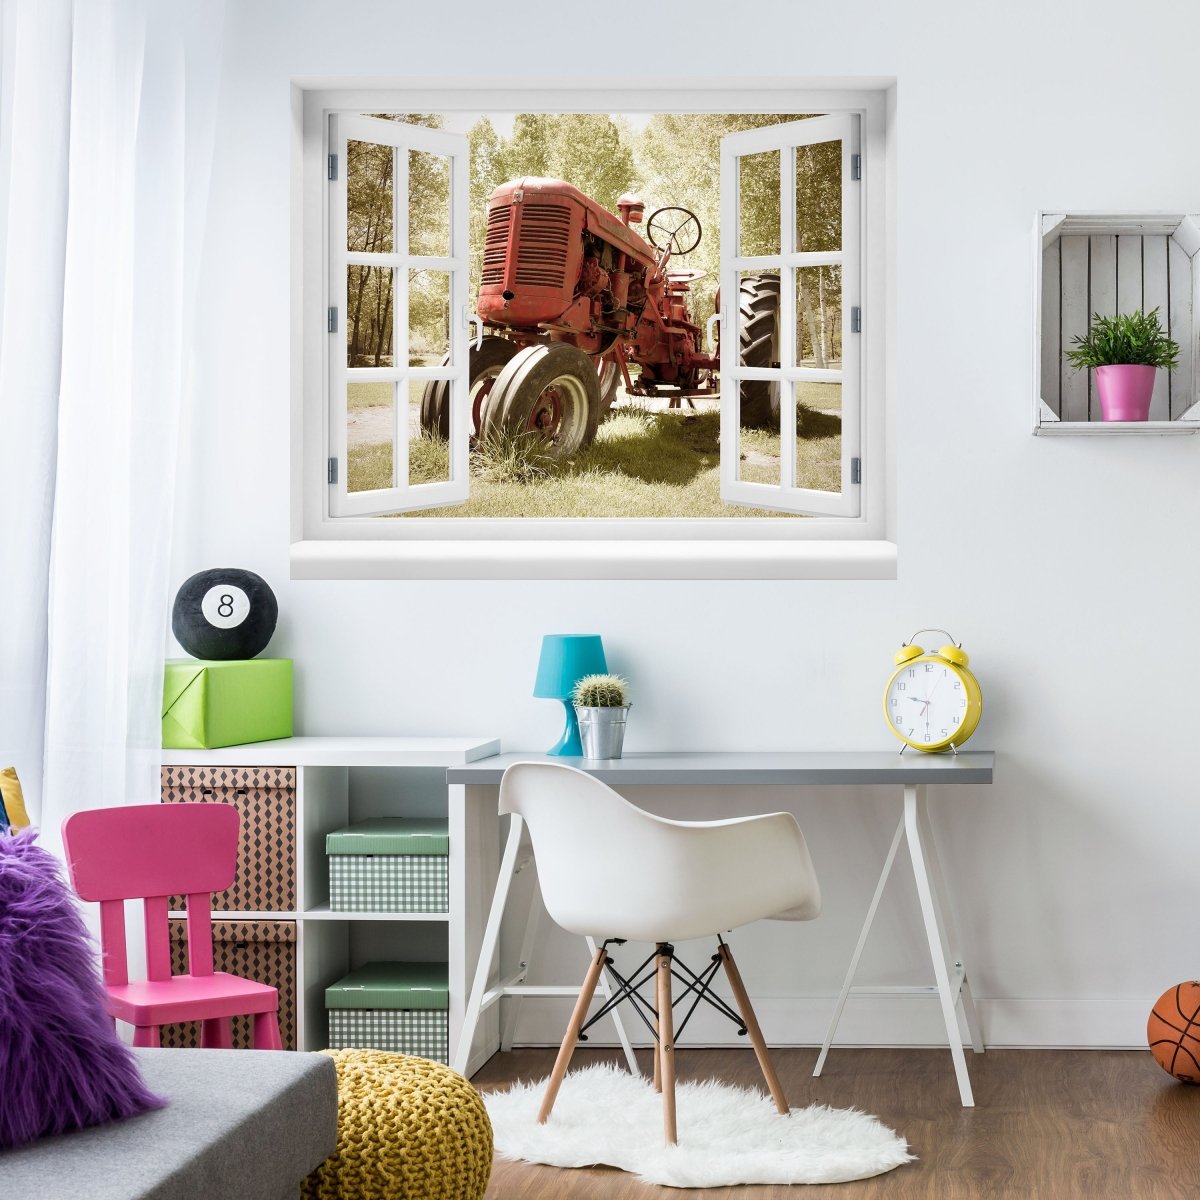 Old Tractor 3D Wall Sticker - Wall Decal M0517